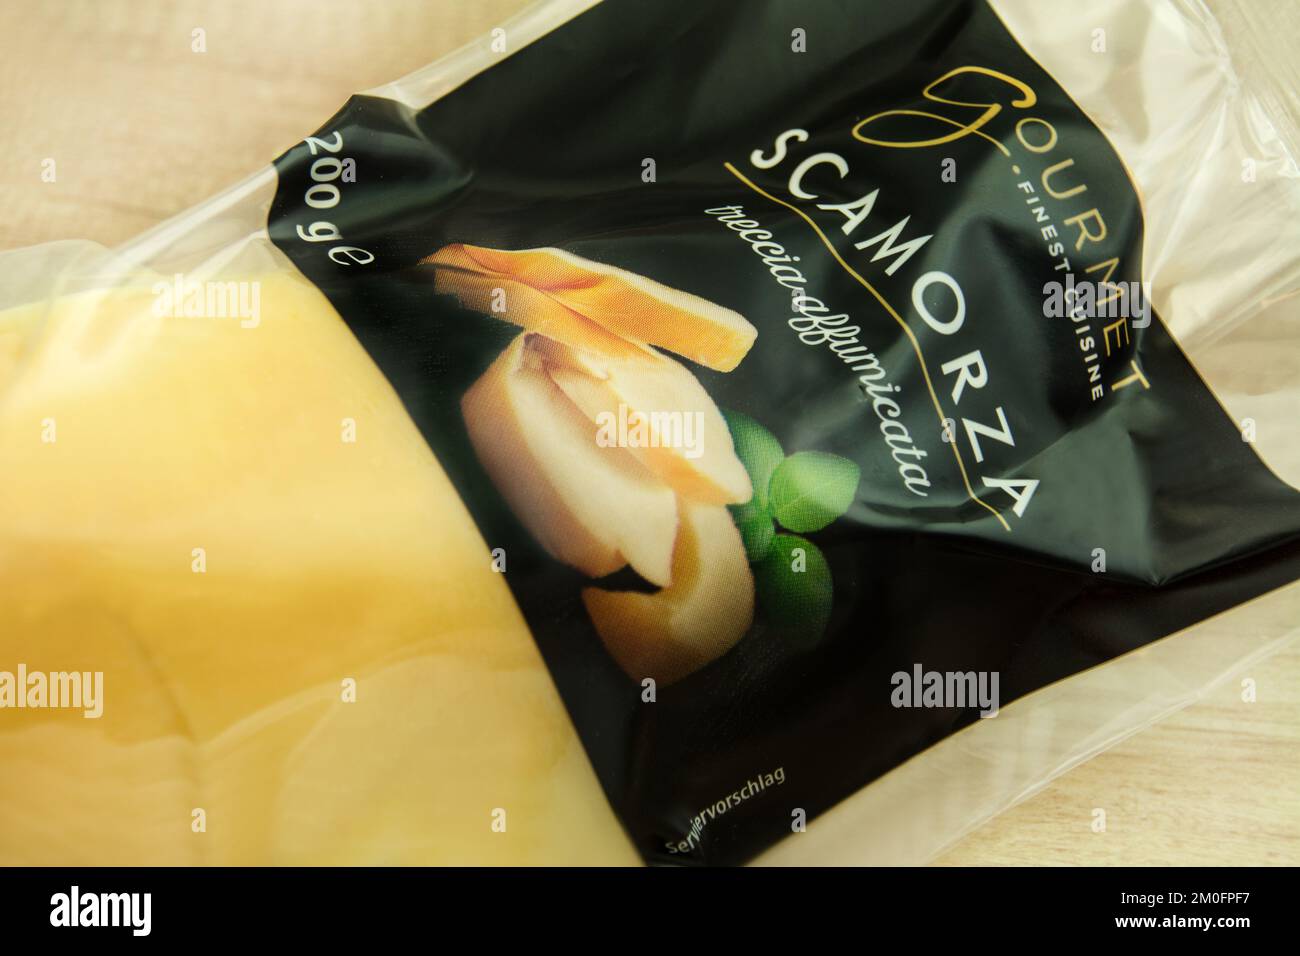 Scamorza kase hi-res stock - images photography Alamy and